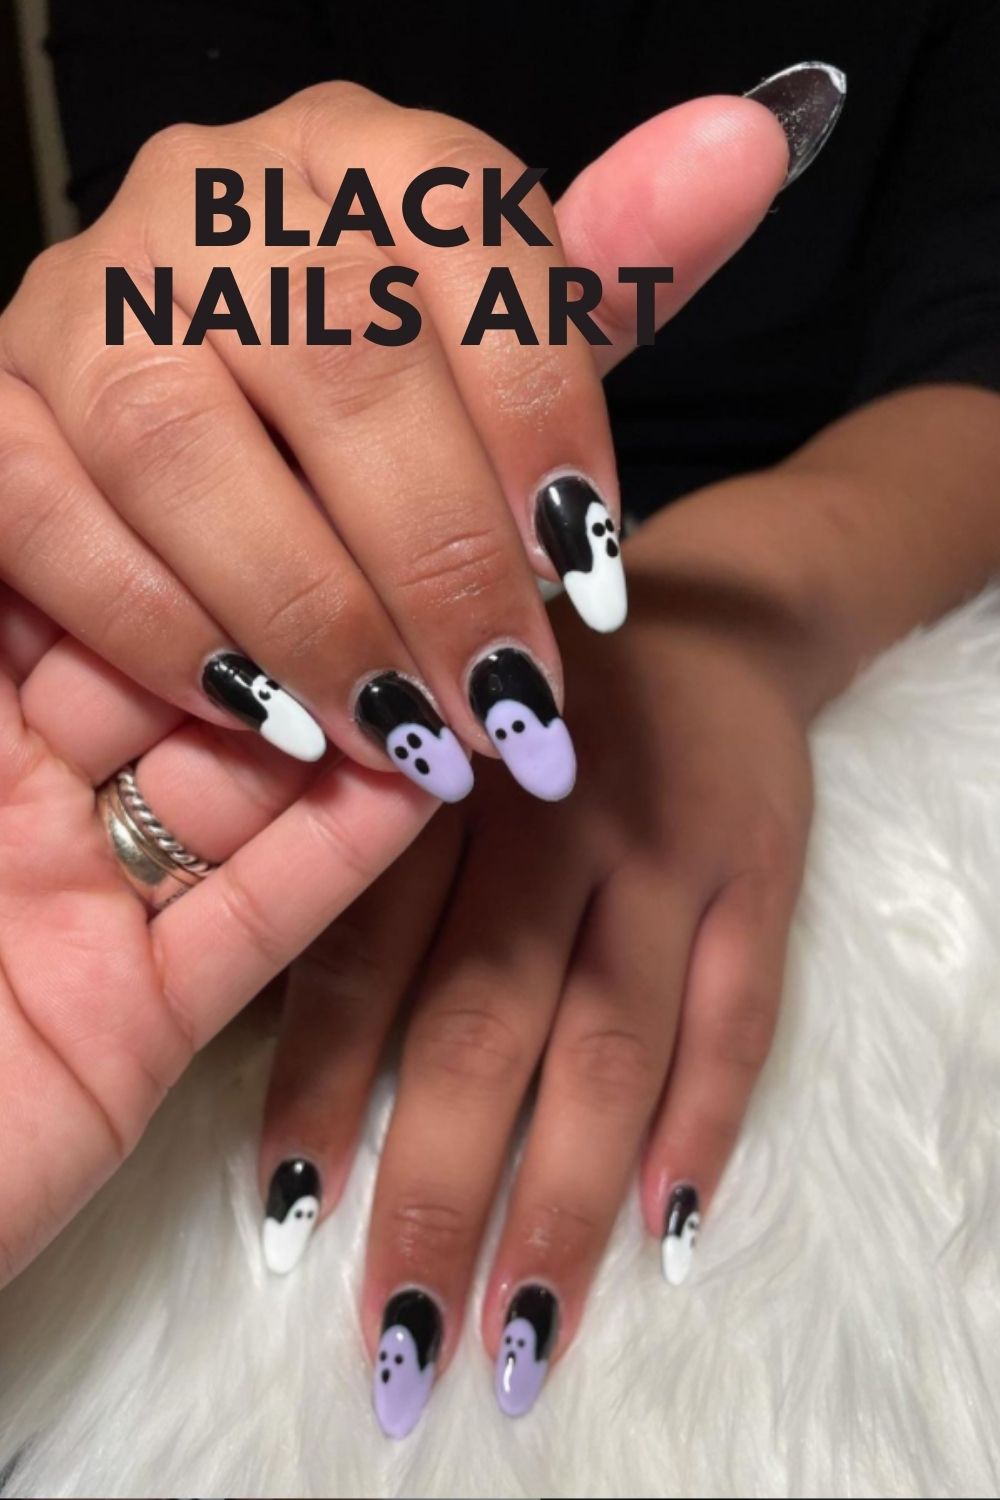 Black nail design with ghost